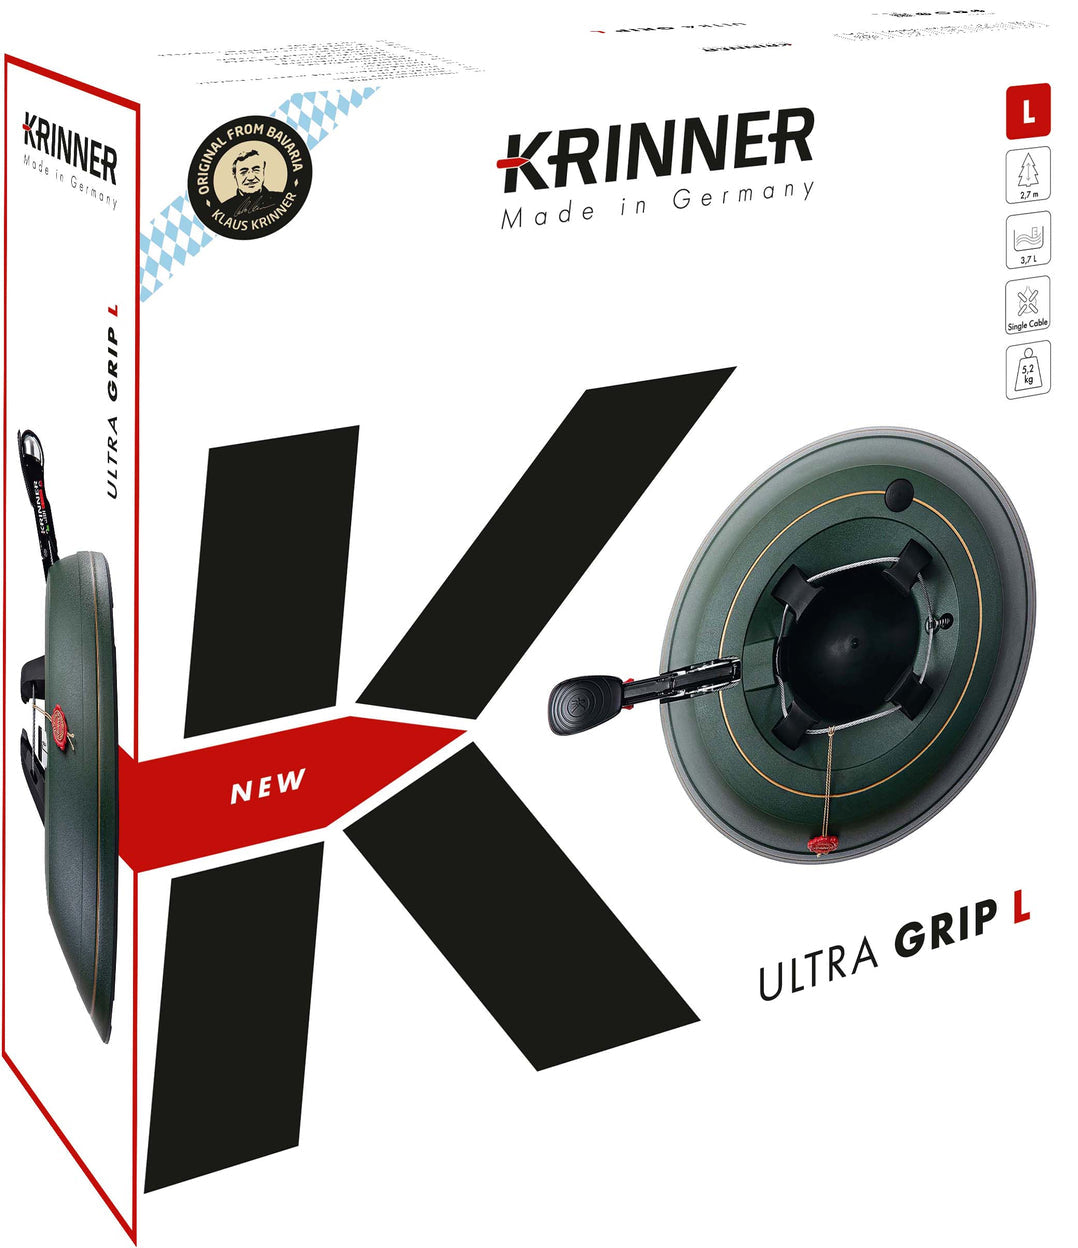 Krinner Ultra Grip L christmas tree stand